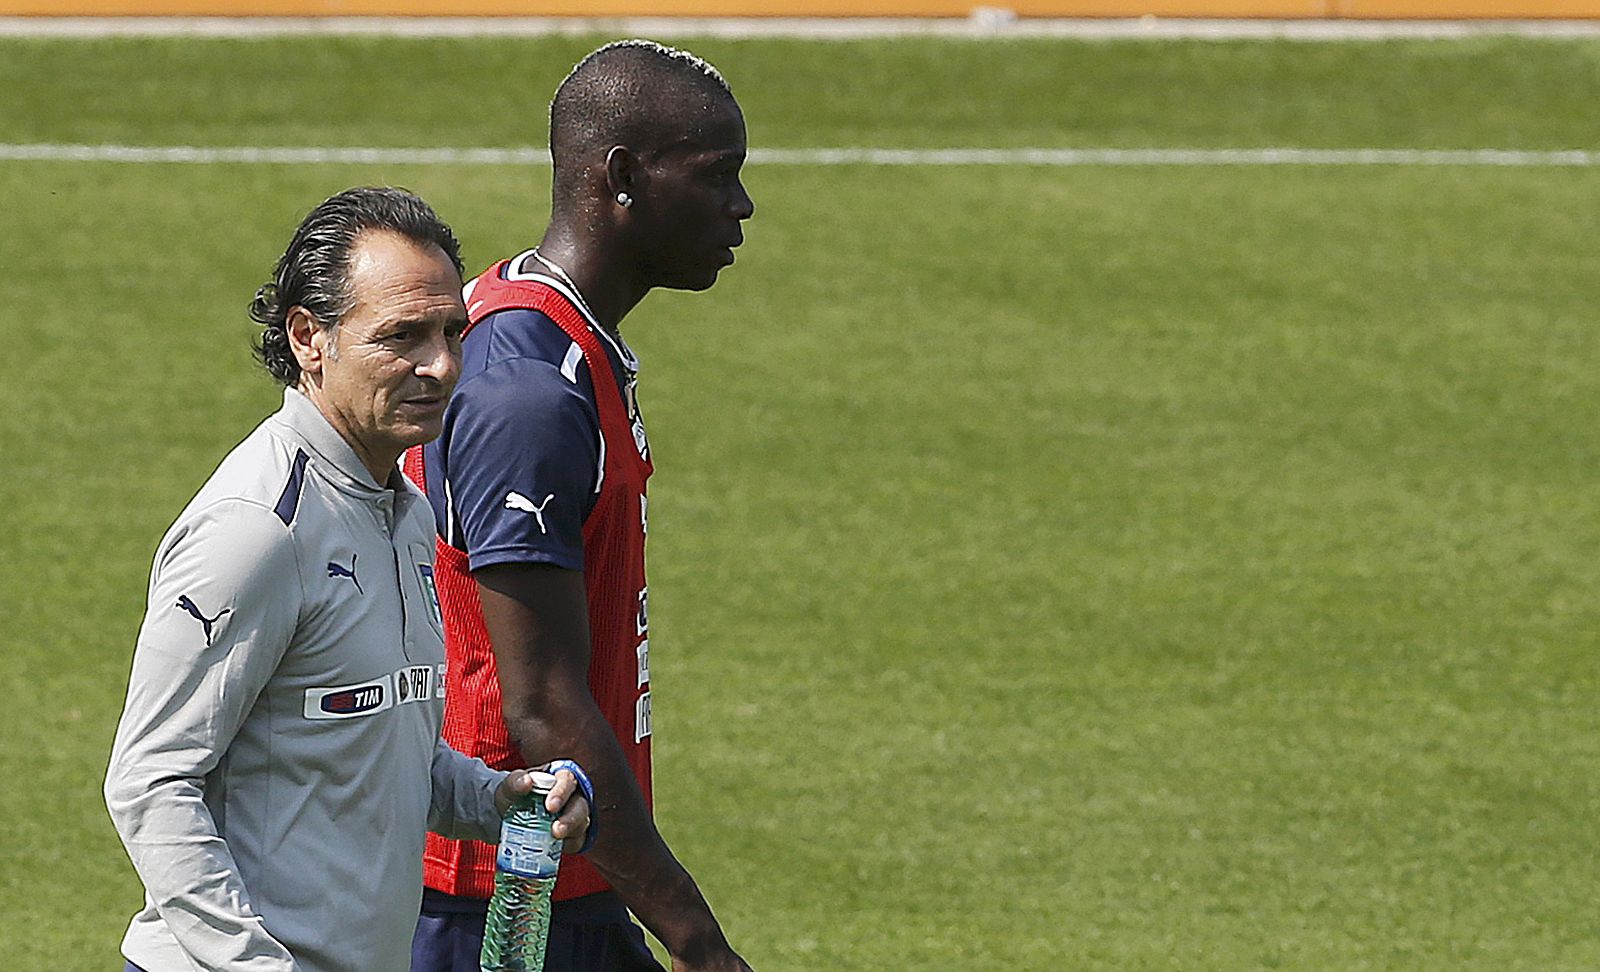 Italy's coach Prandelli talks to his player Balotelli during a training session during the Euro 2012 at Cracovia Stadium in Krakow